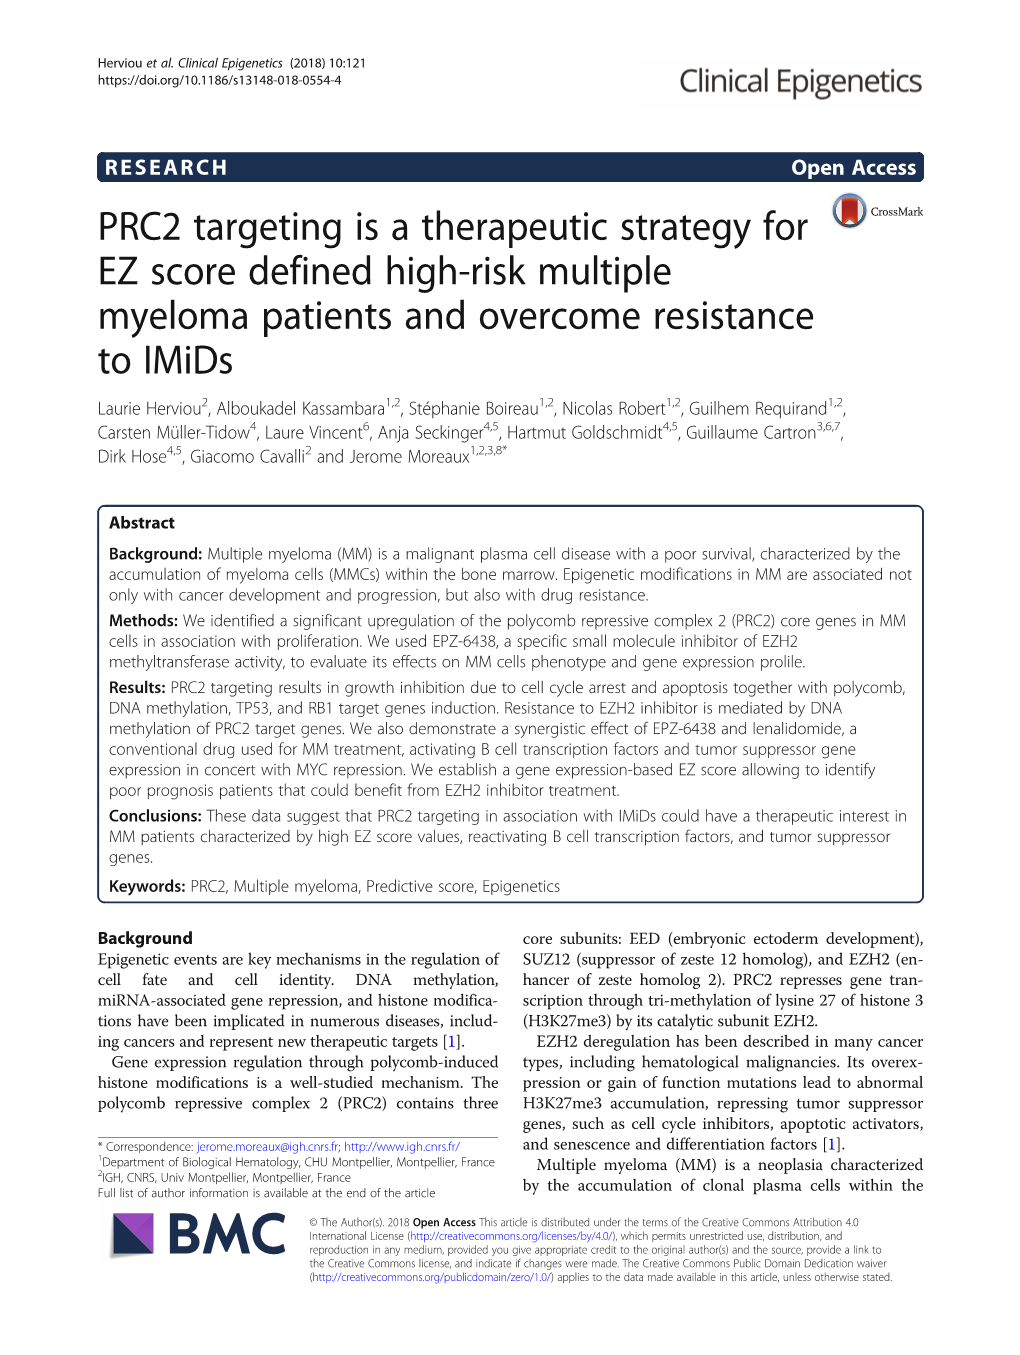 PRC2 Targeting Is a Therapeutic Strategy for EZ Score Defined High